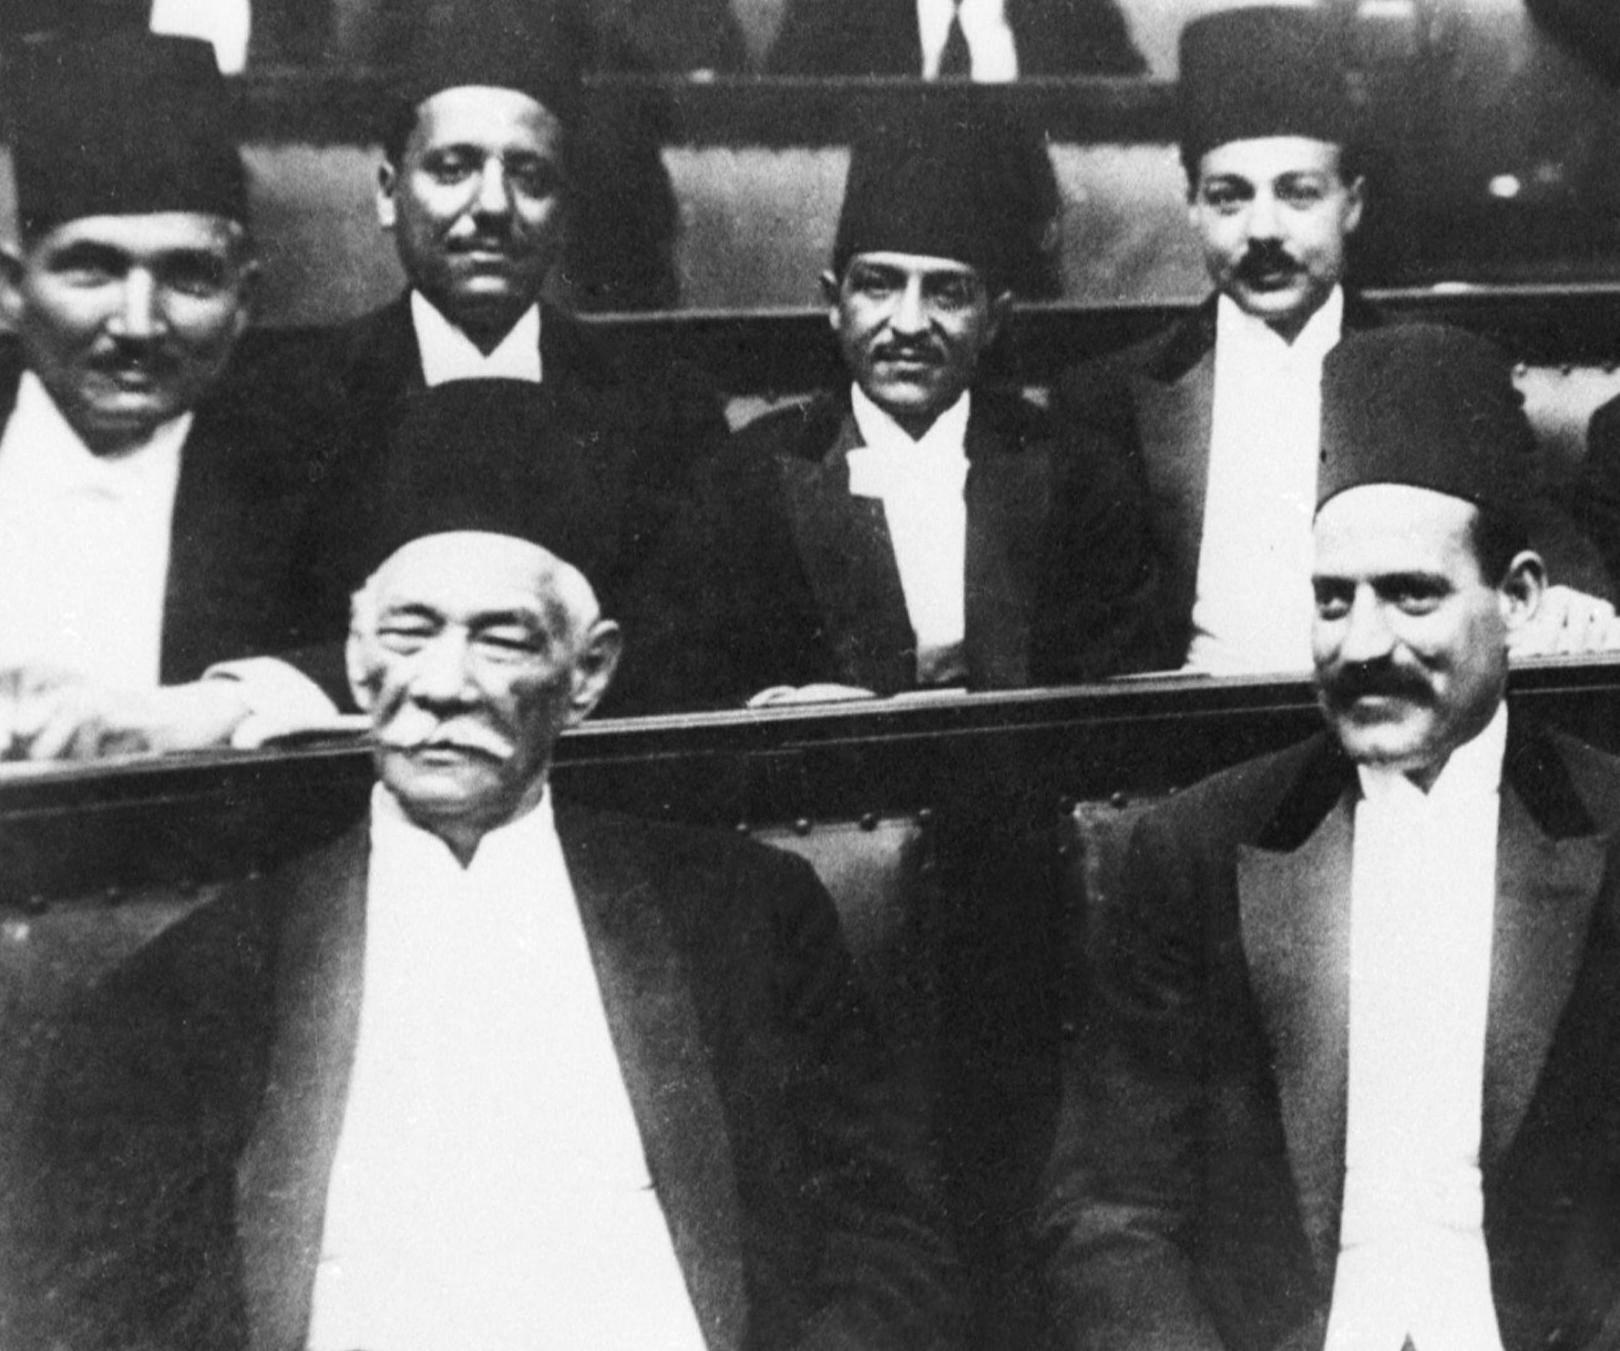 An undated picture from the early 1920s shows Saad Zaghloul (L), the leader of Egypt's 1919 revolution against the British occupation, with Mustafa Pacha al-Nahas (R), his successor as chief of the Wafd party, attending a parliament session (AFP)